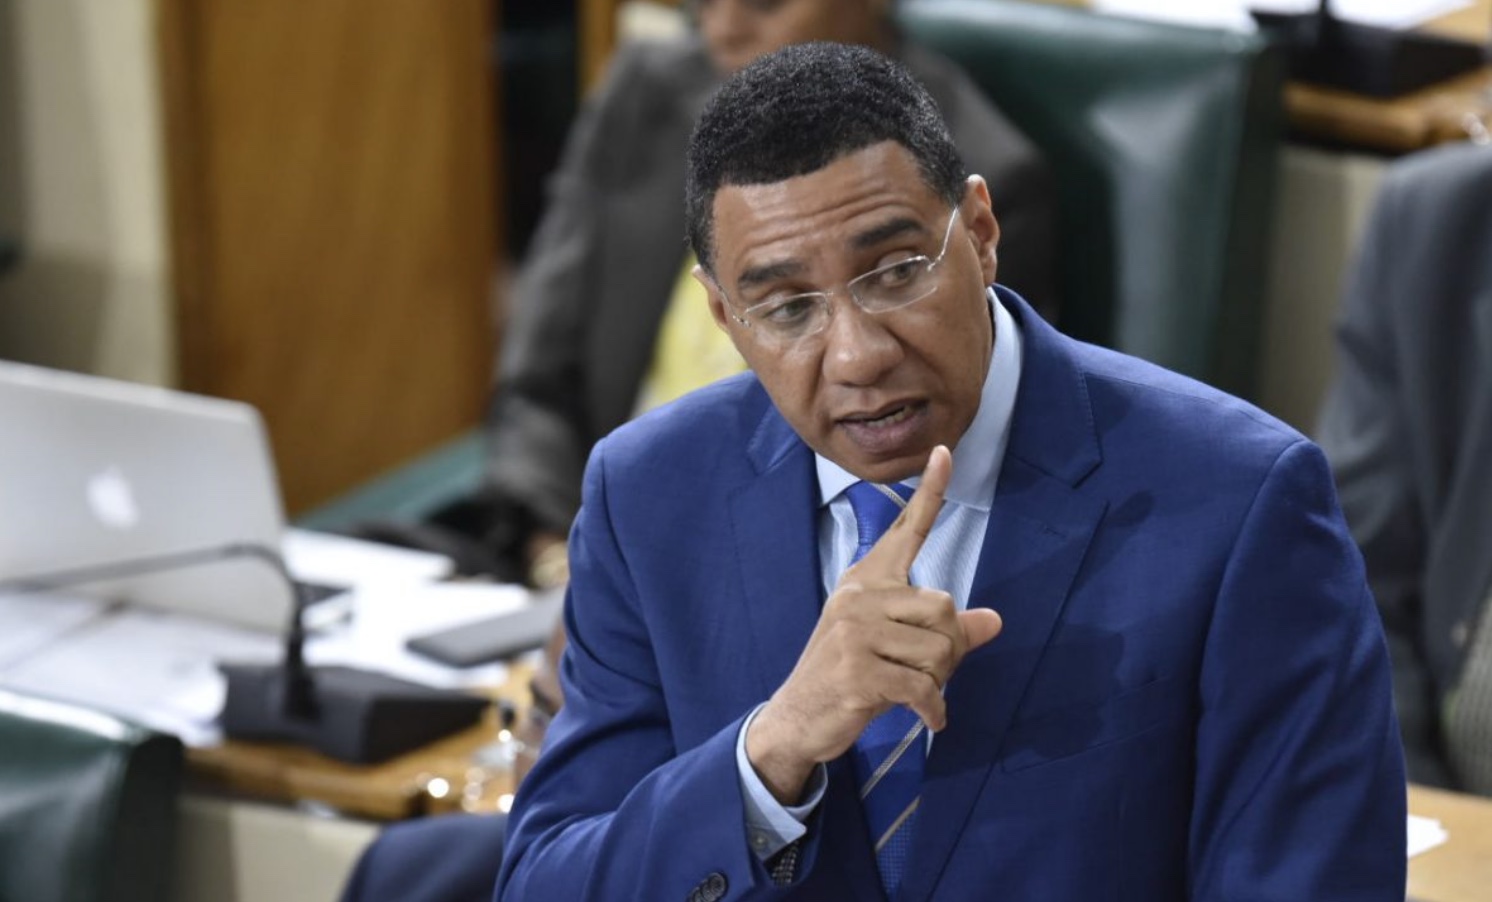 PM Says Murders Down by 17%; Jamaicans React - Watch Videos